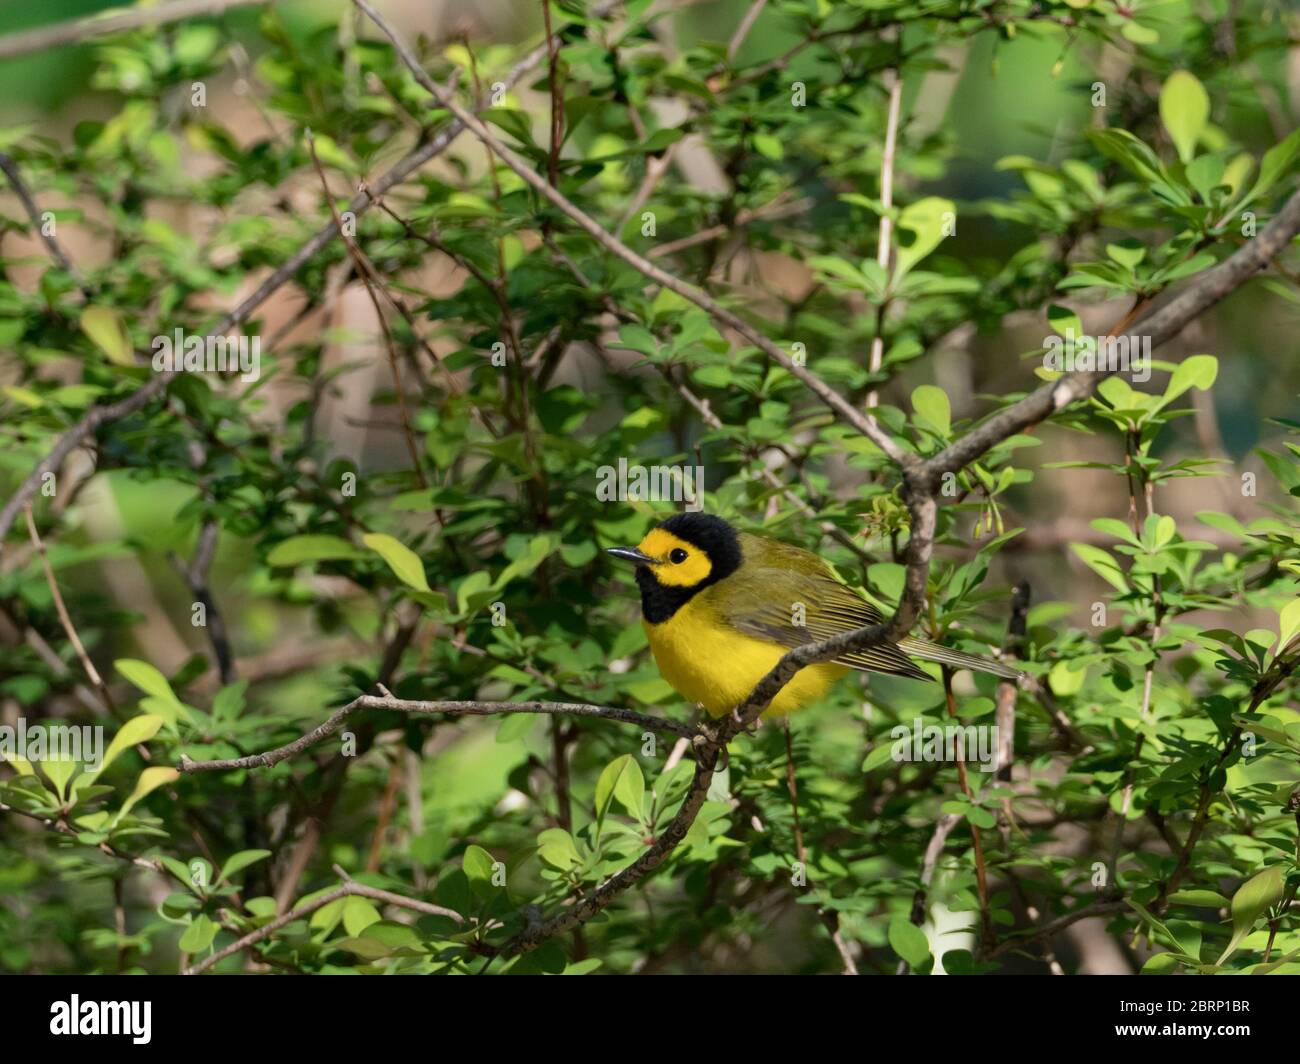 Hooded warbler, Setophaga citrina, a gorgeous neotropical migrant warbler in the forests of Ohio, USA Stock Photo